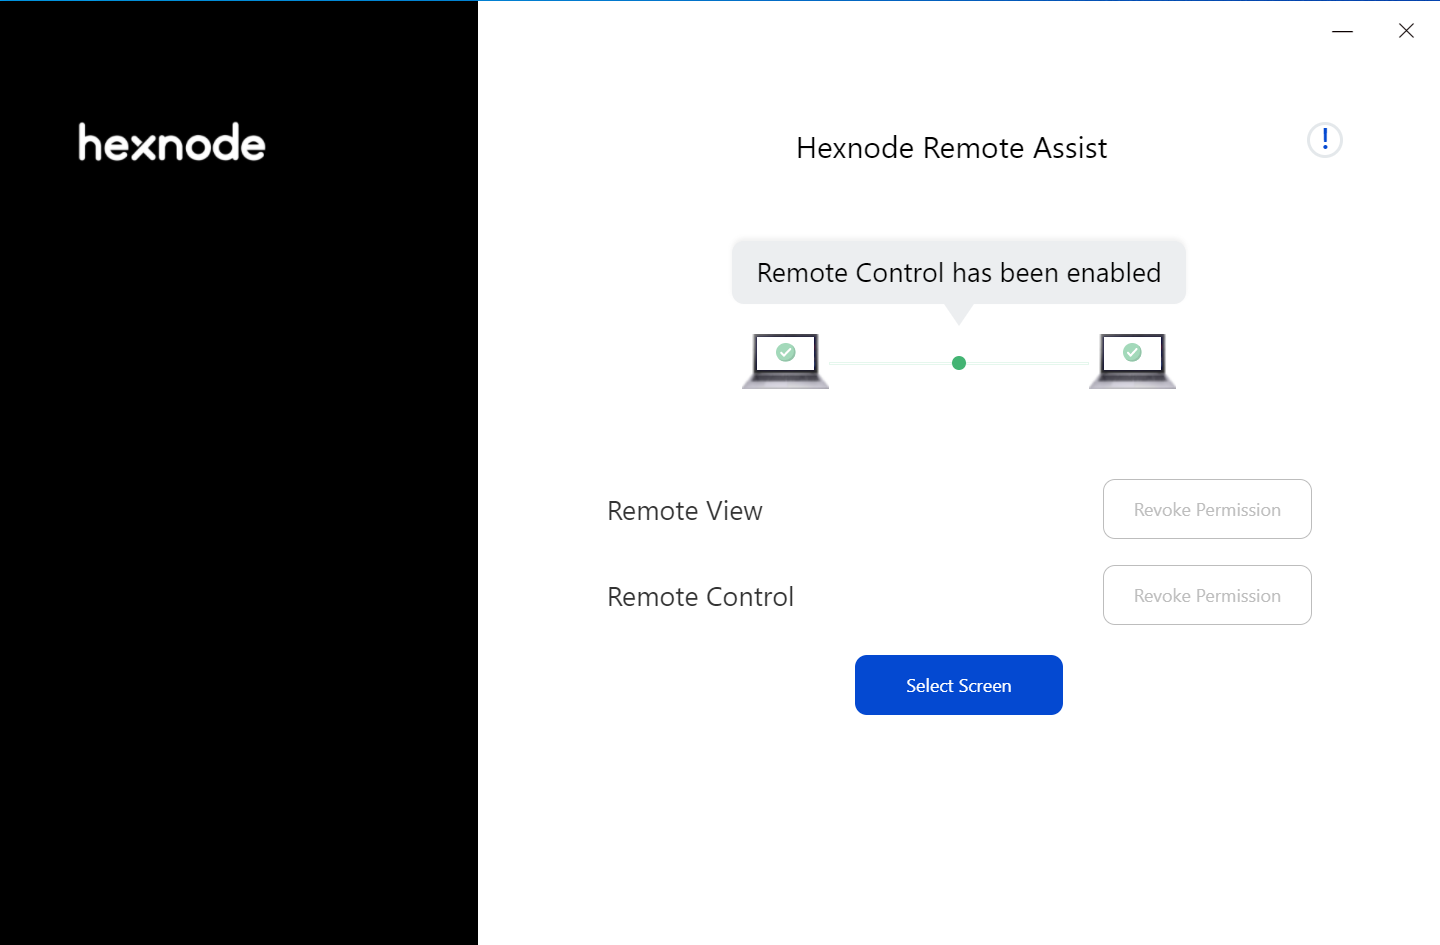 Permission granted for Remote Control on the Windows device